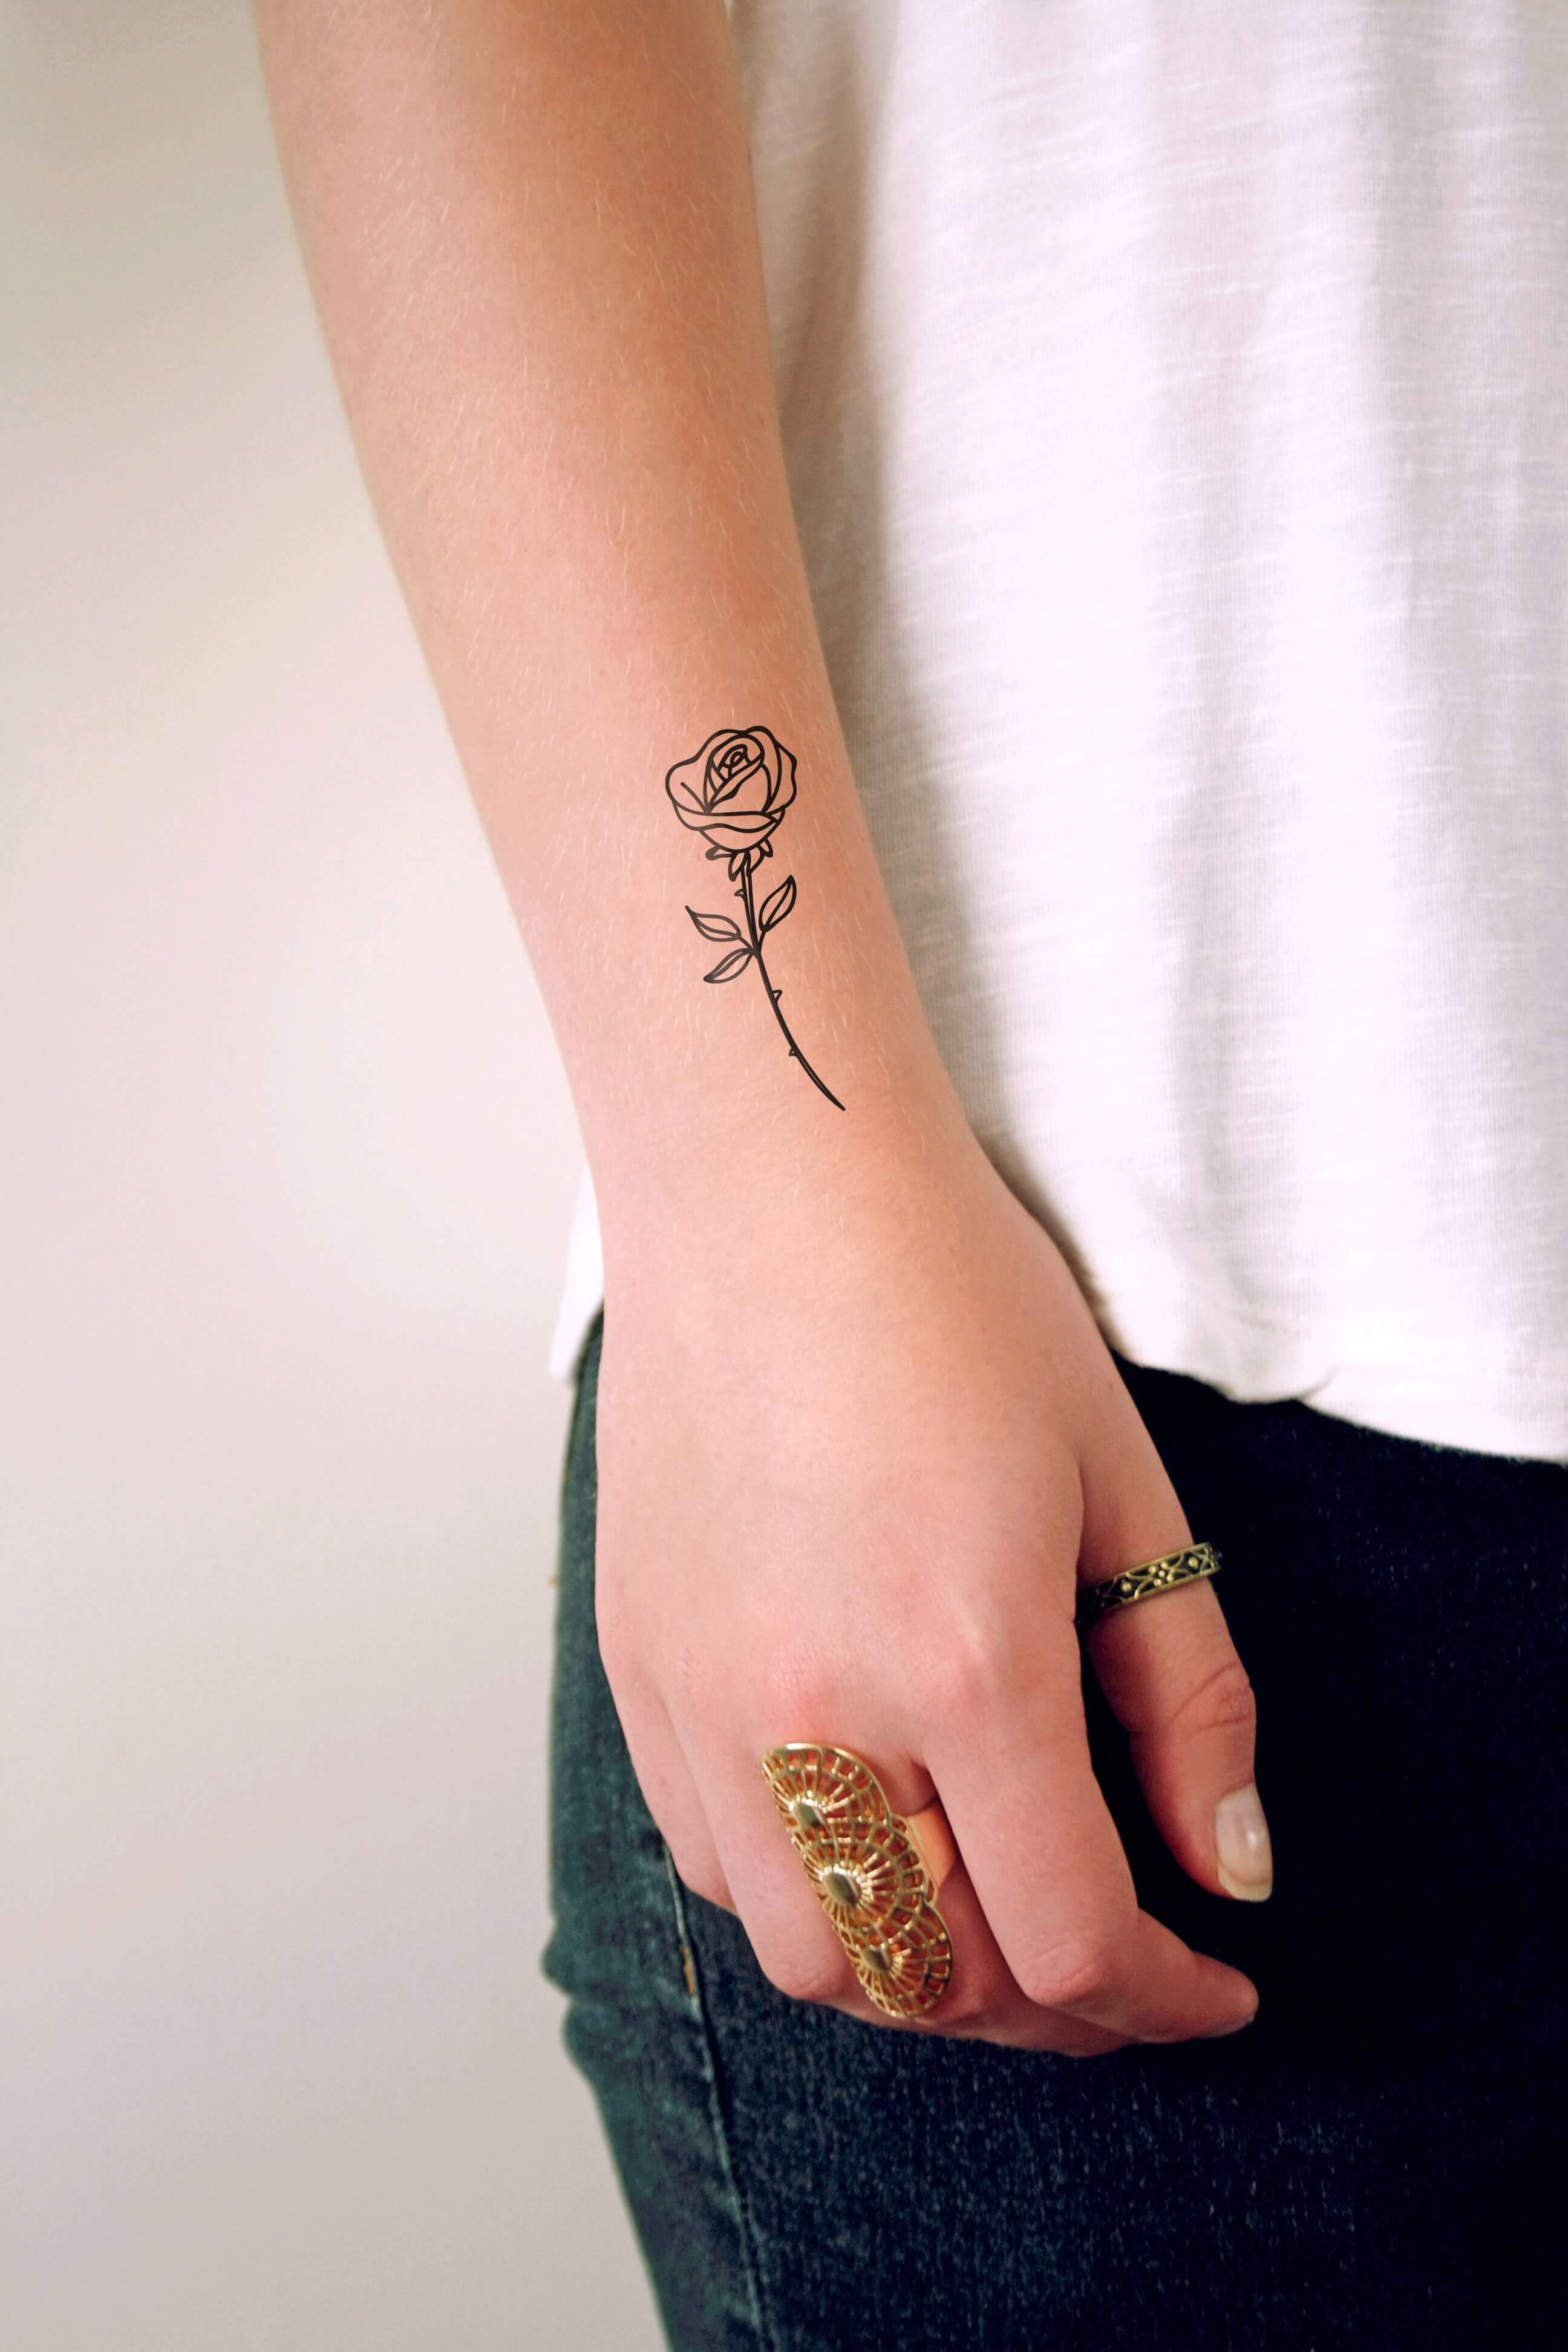 55 Rose Tattoo Ideas To Try Because Love And A Rose Can t Be Hid